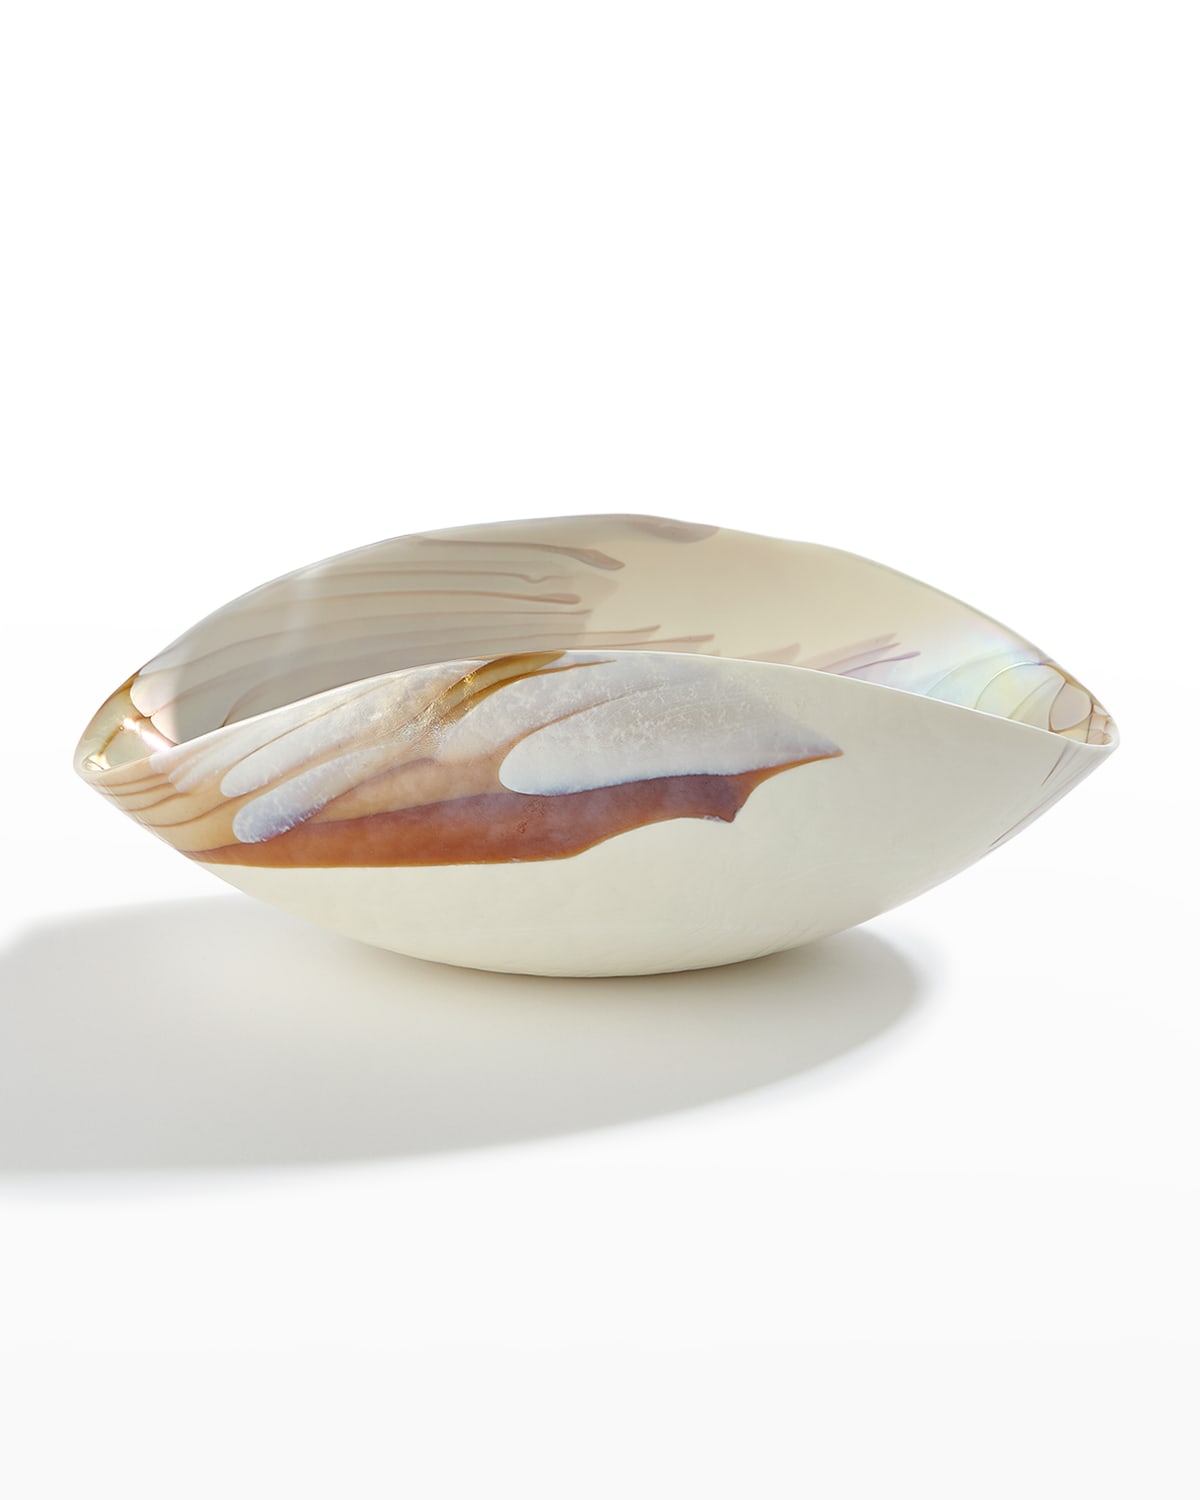 Shop Global Views Small Oval Bowl, Ivory/amber